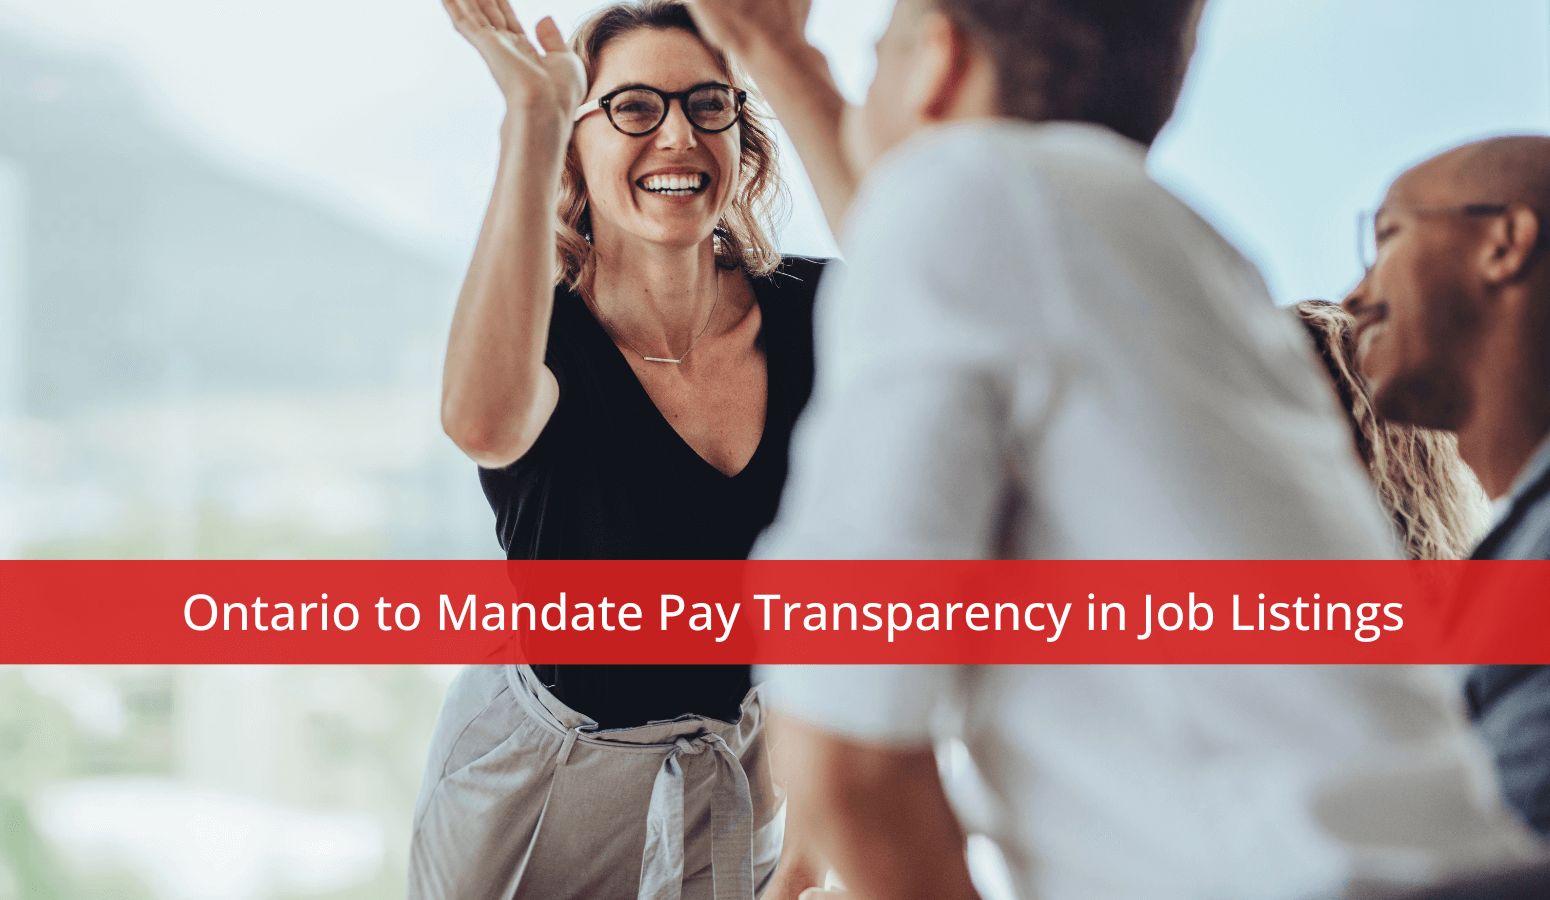 Featured image for “Ontario to Mandate Pay Transparency in Job Listings”